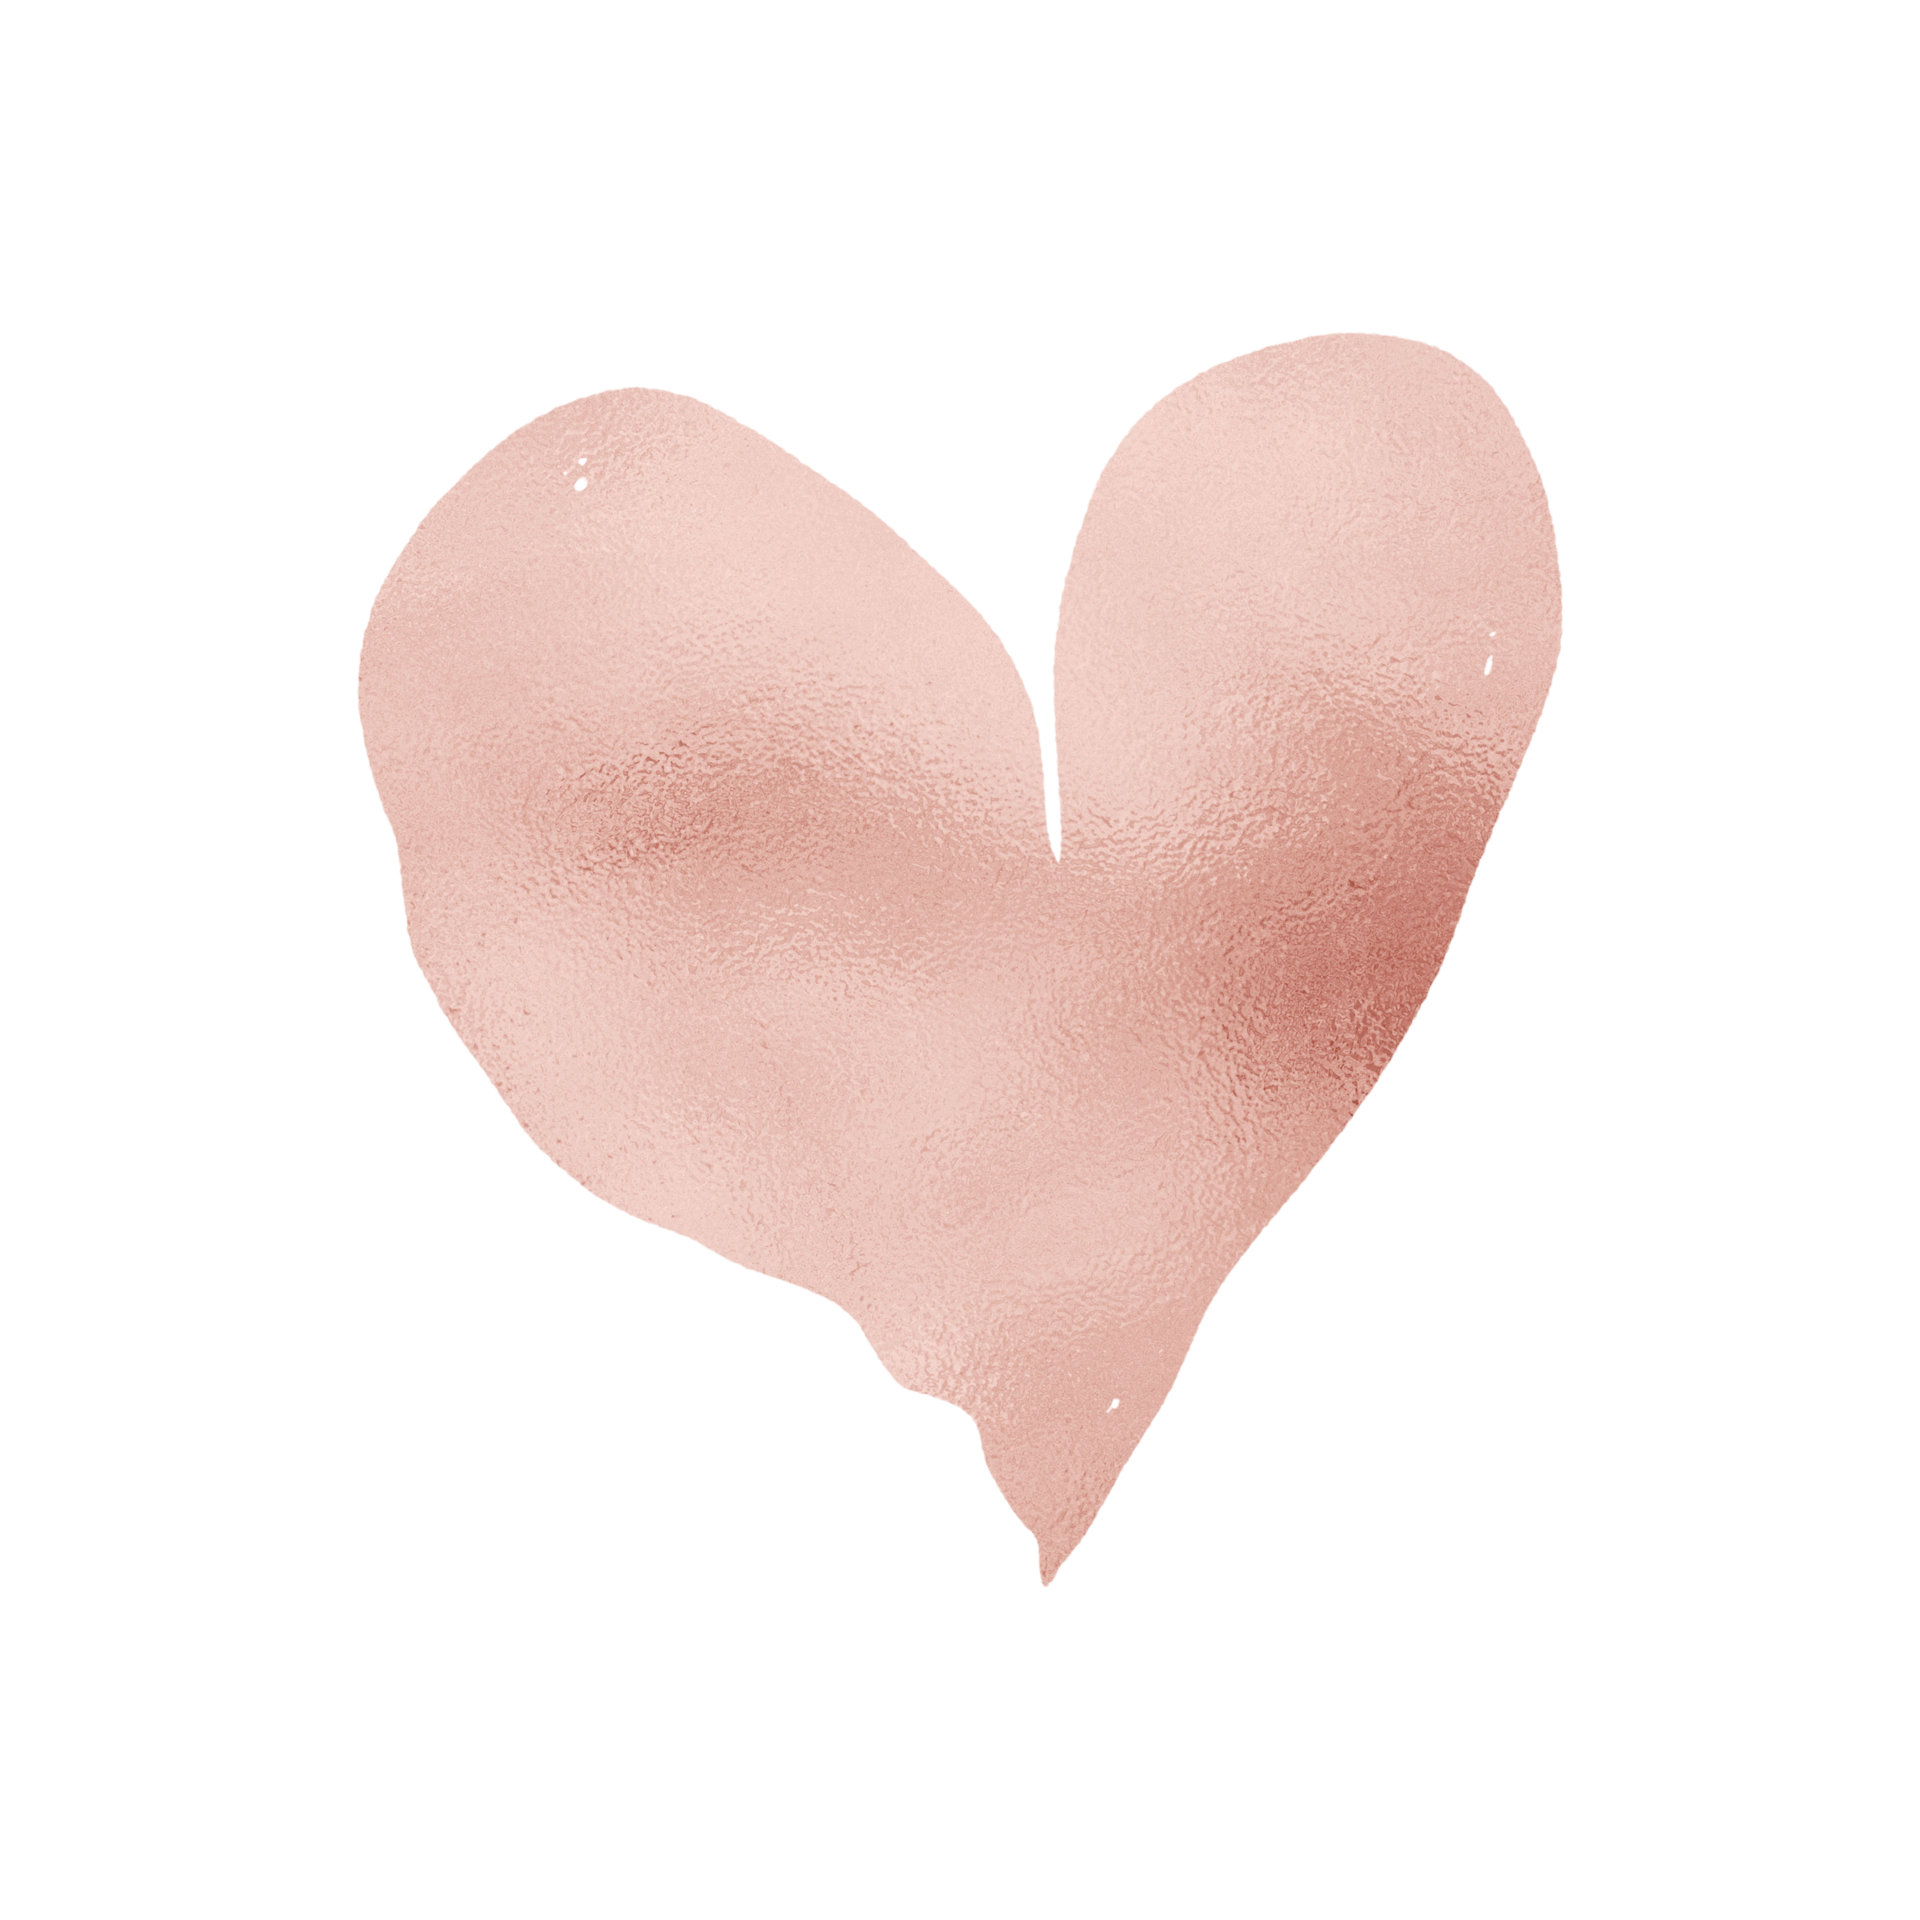 glowing heart clipart pictures